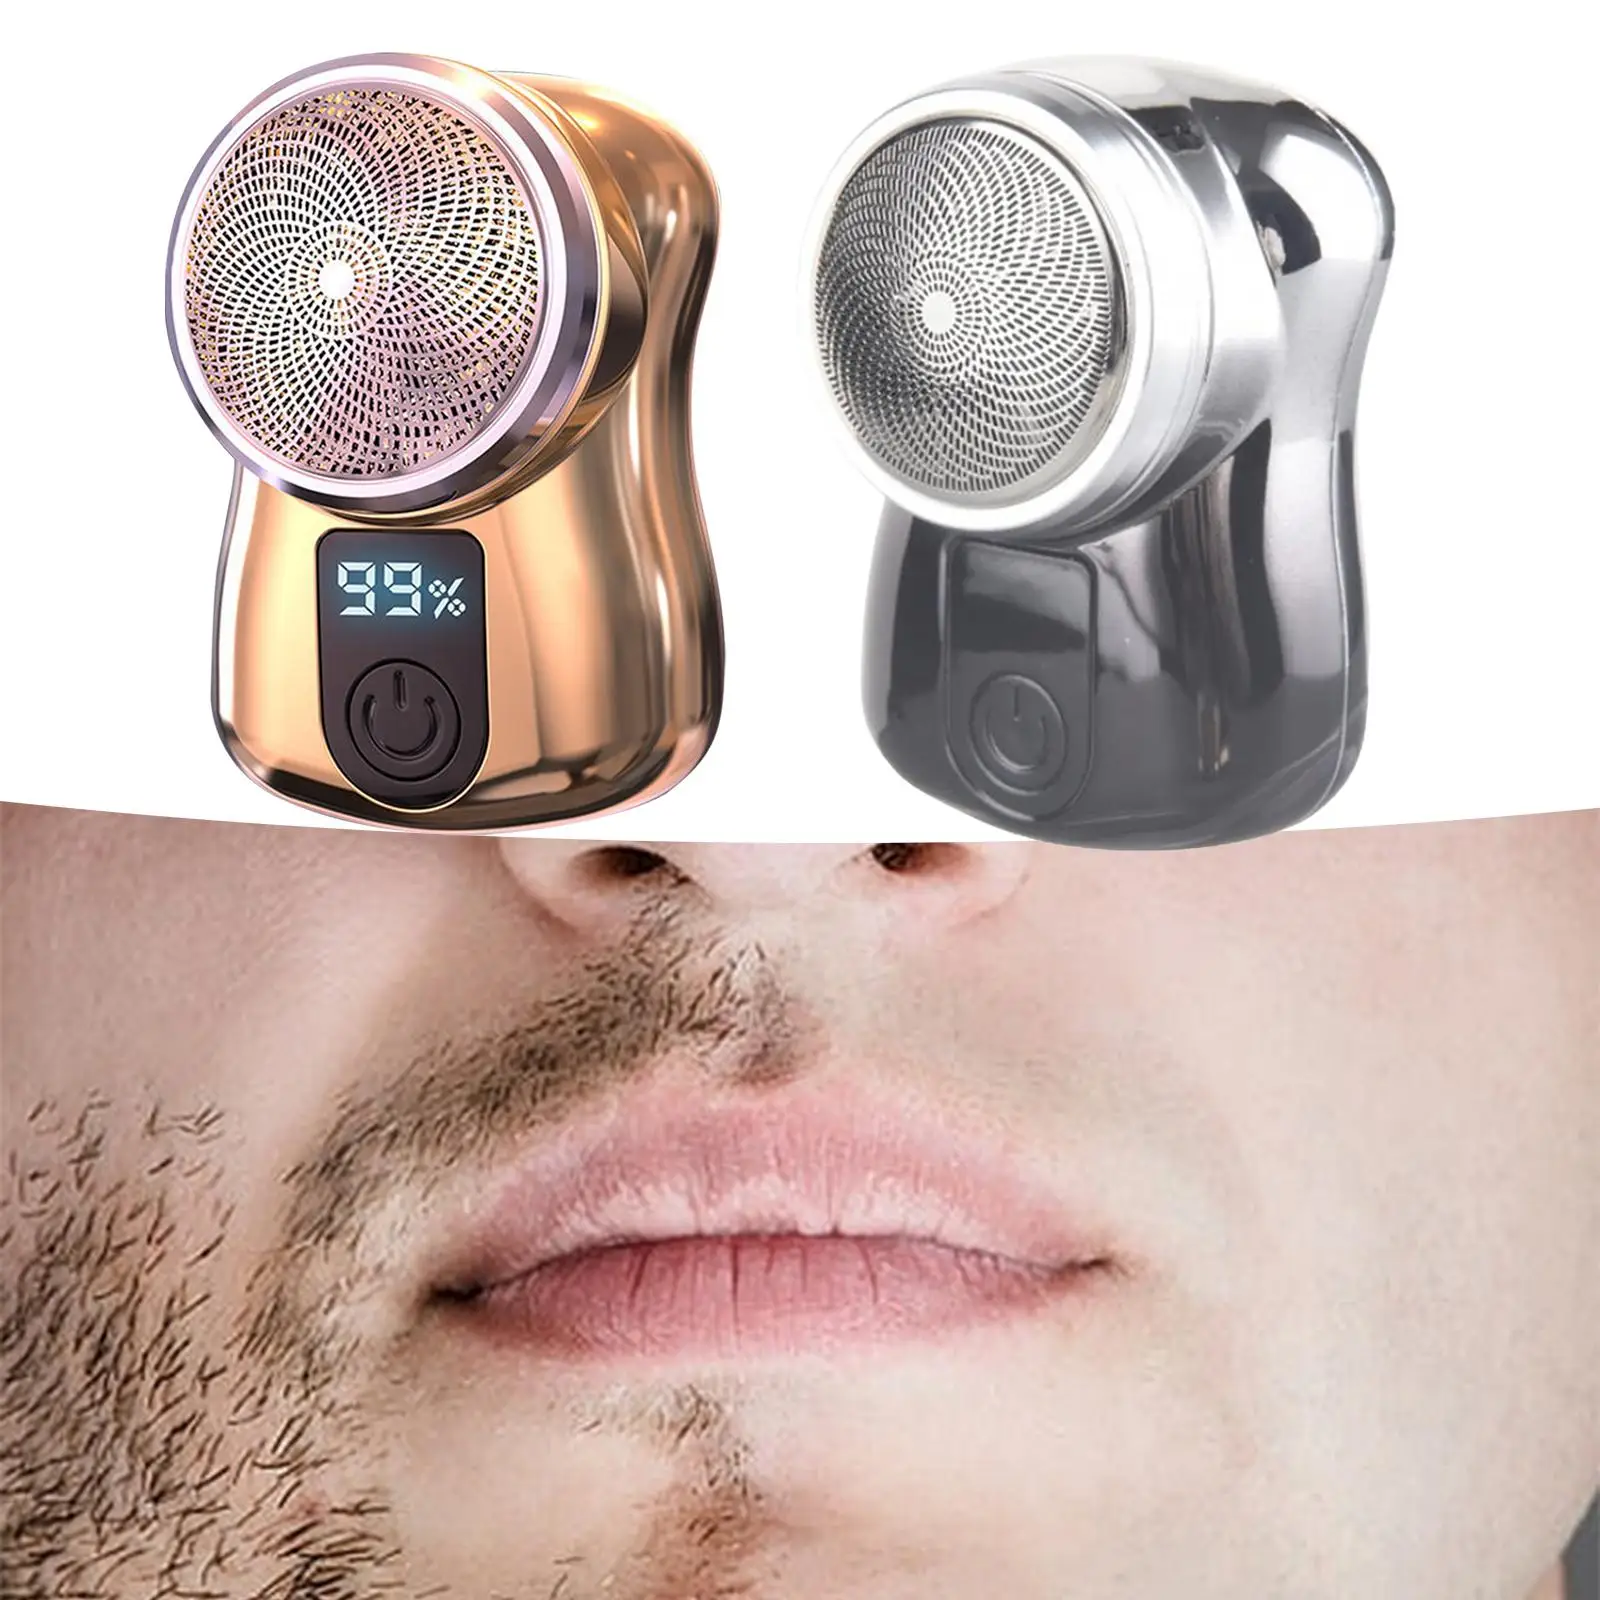 Shaver for Men Washable Head Rechargeable for Home Car Travel Father`s Day Gifts Digital Display Pocket Size Shaving Beard Razor